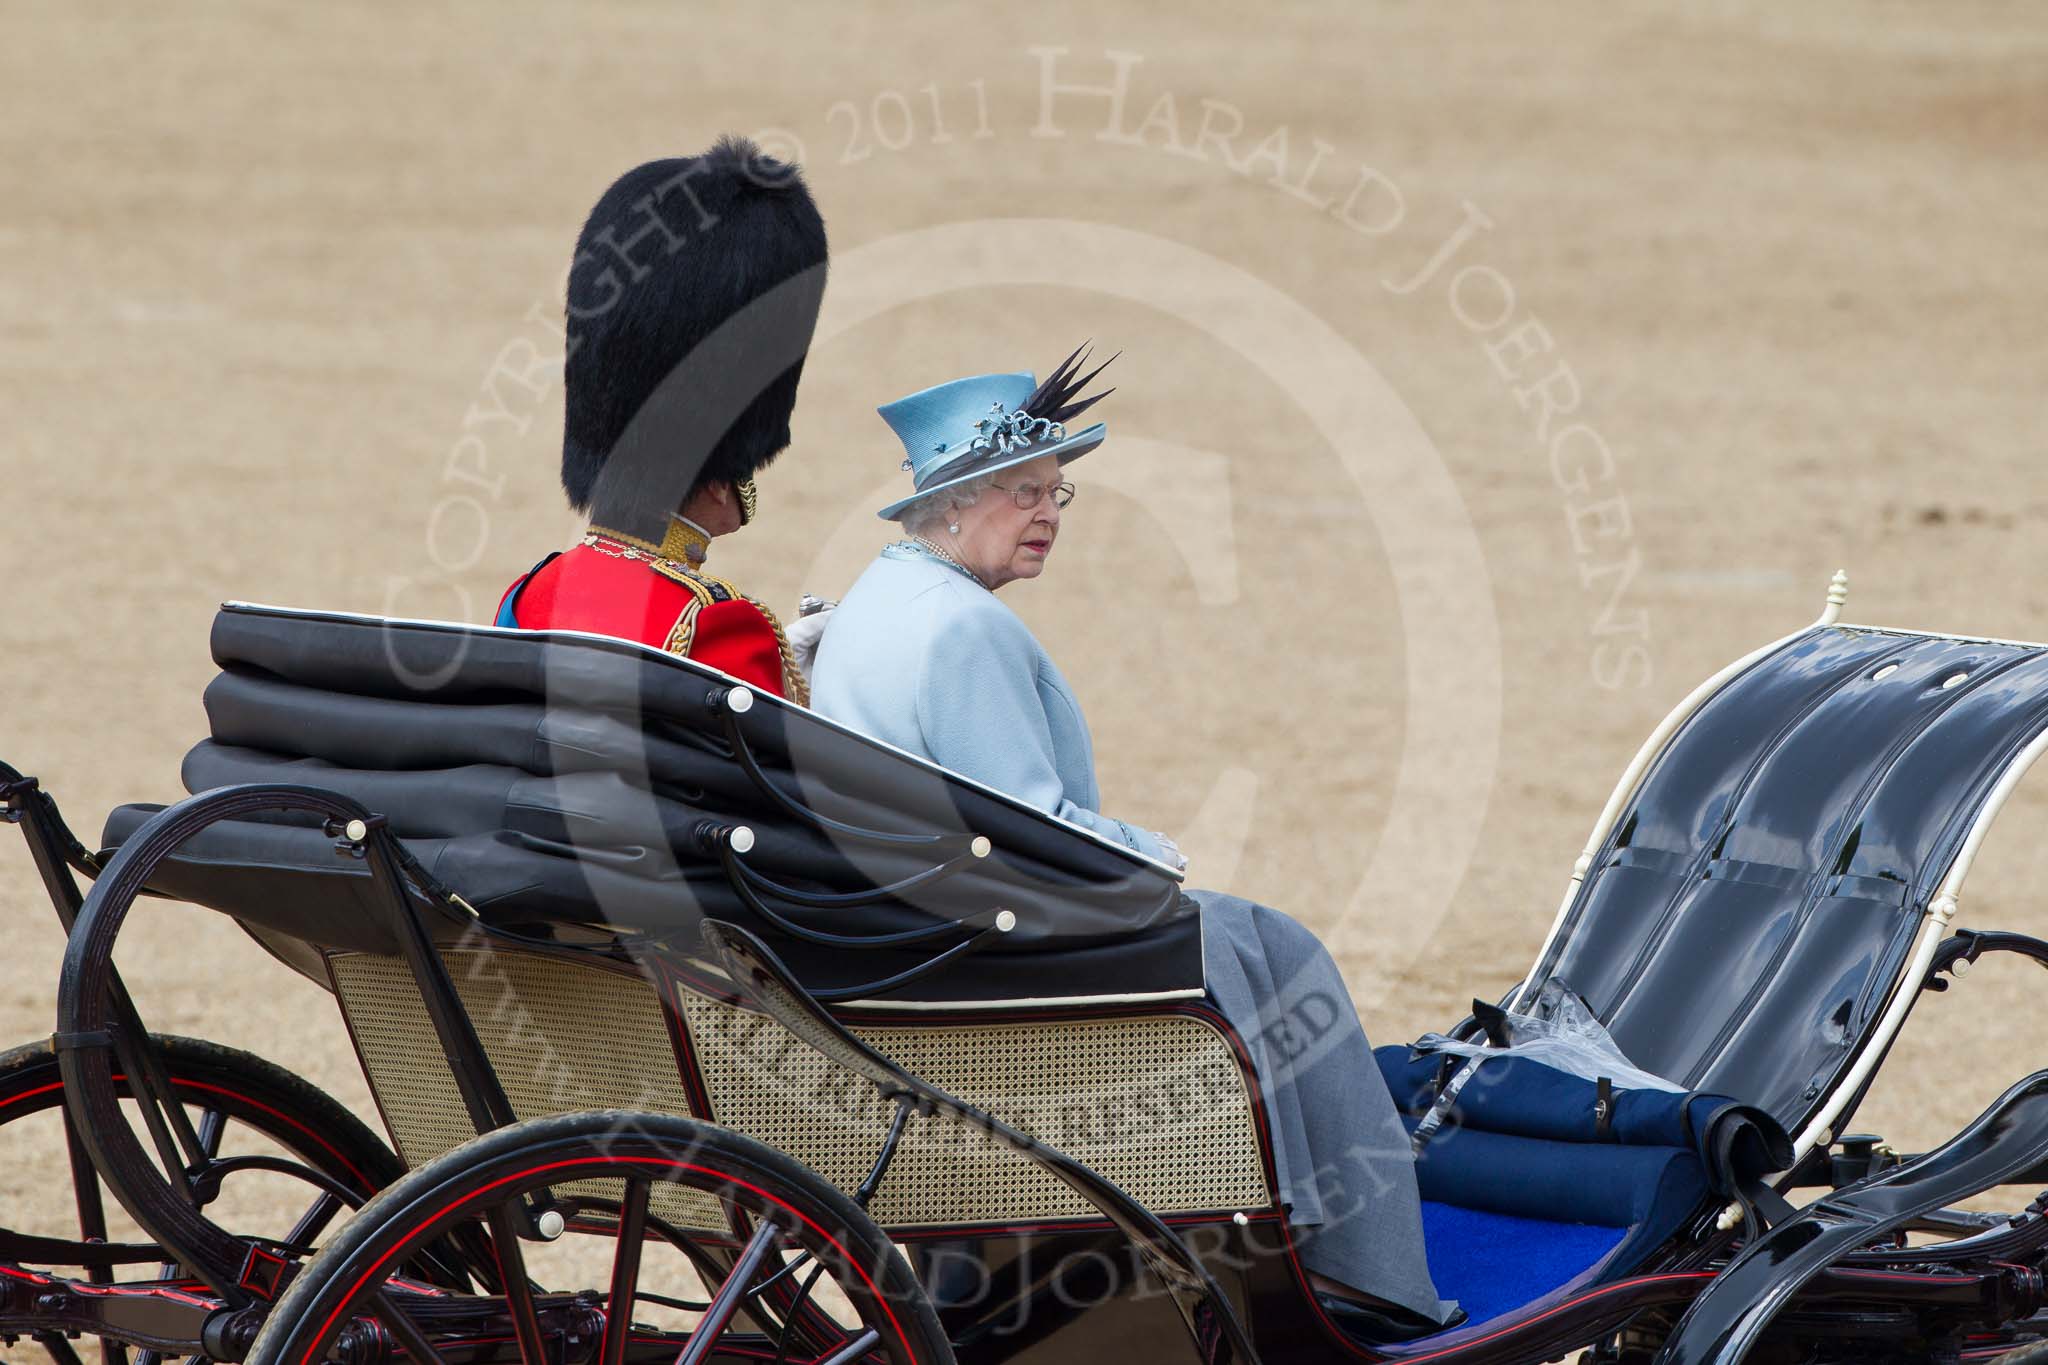 Trooping the Colour 2011: HM The Queen and HRH Prince Philip, The Duke of Edinburgh, in the ivory mounted phaeton, leaving the parade ground..
Horse Guards Parade, Westminster,
London SW1,
Greater London,
United Kingdom,
on 11 June 2011 at 12:10, image #414